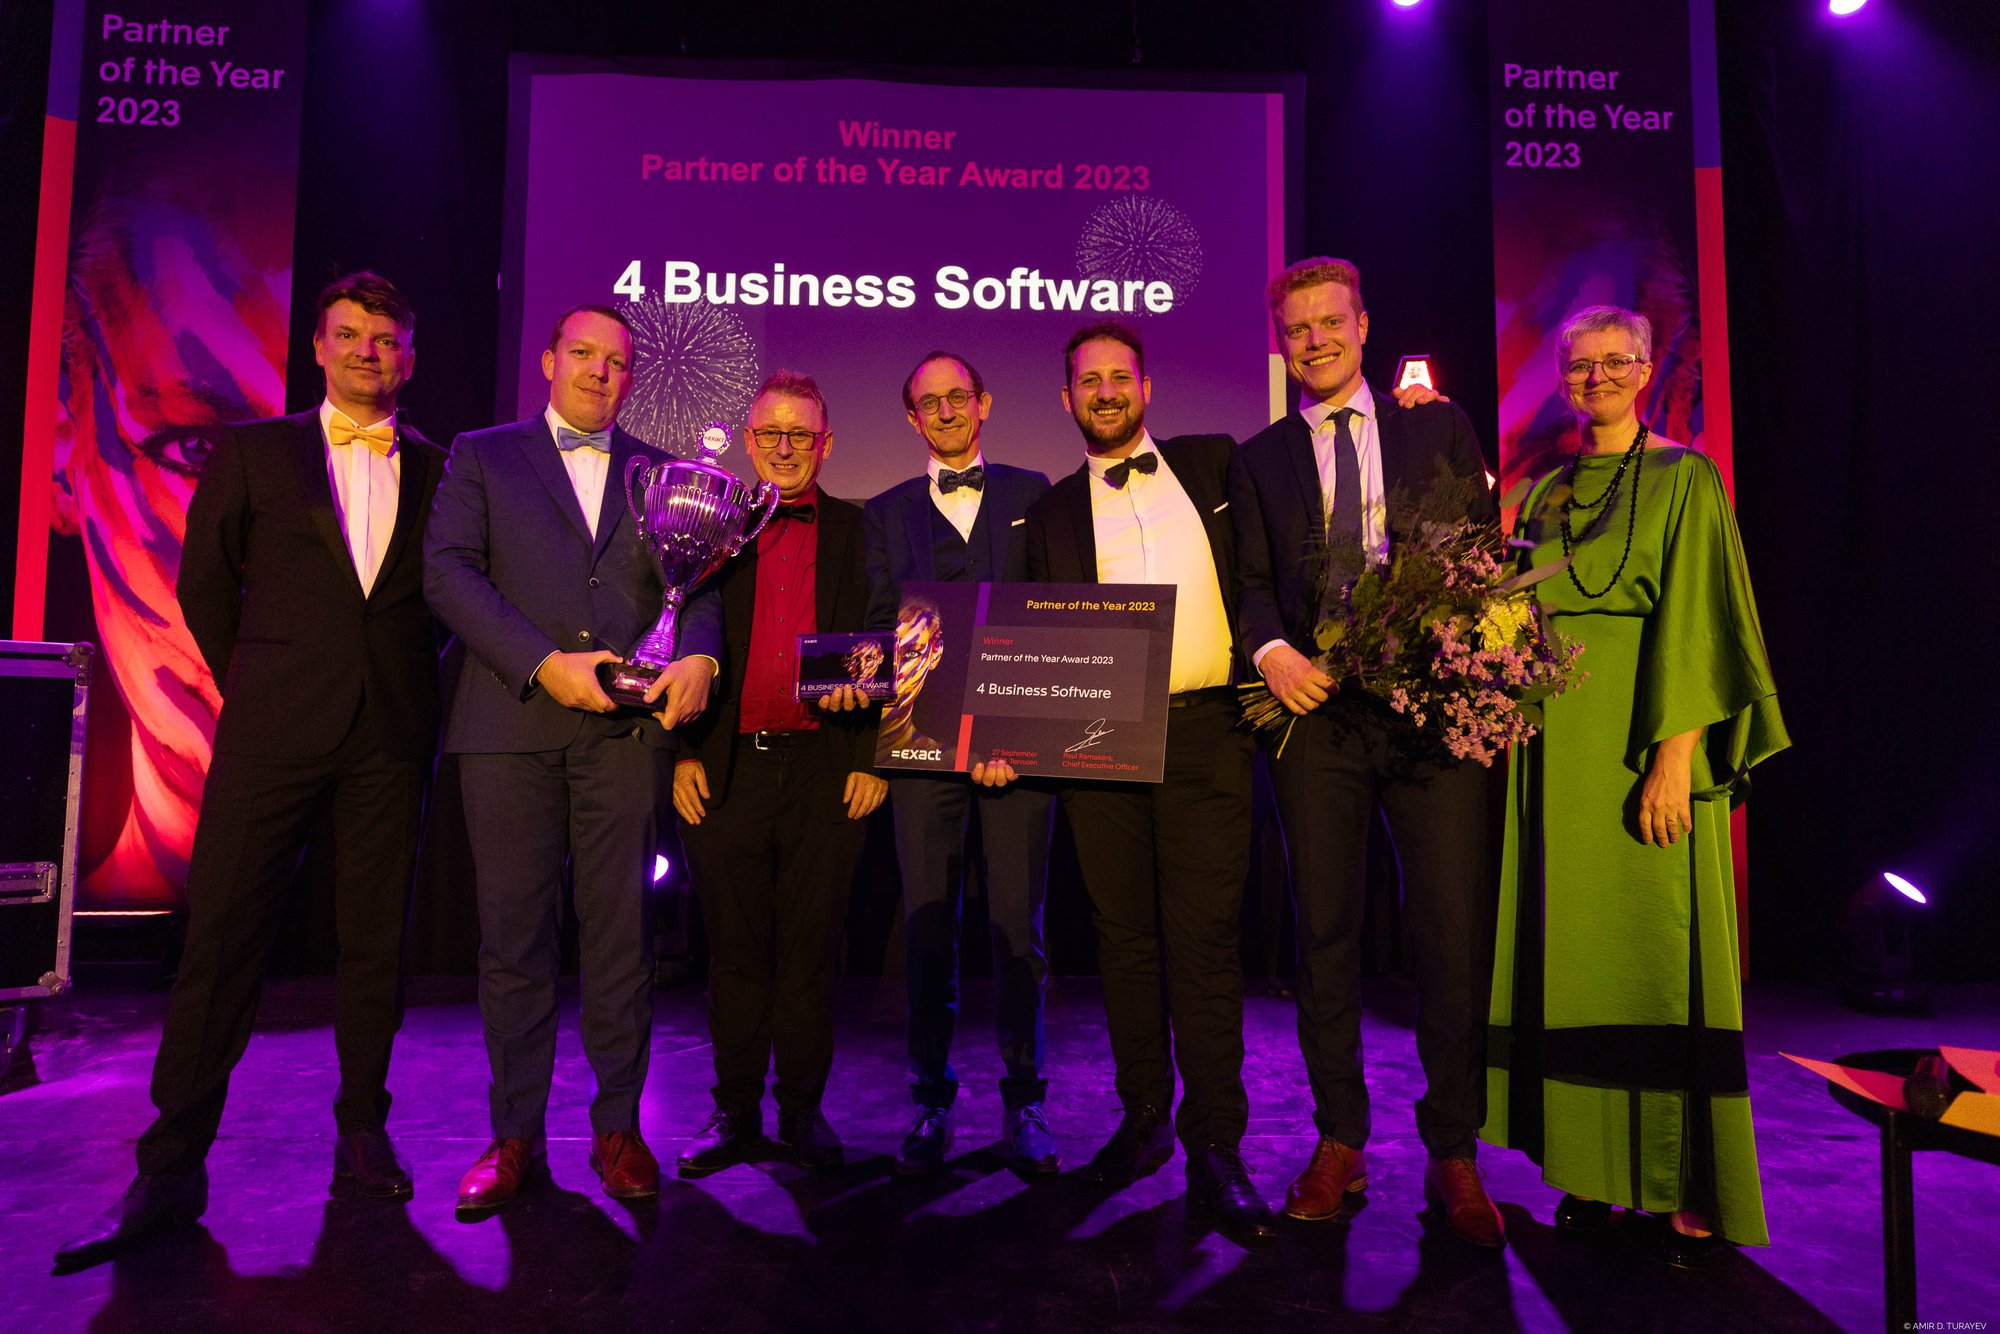 4 Business Software is Exact Partner of the Year 2023 cover